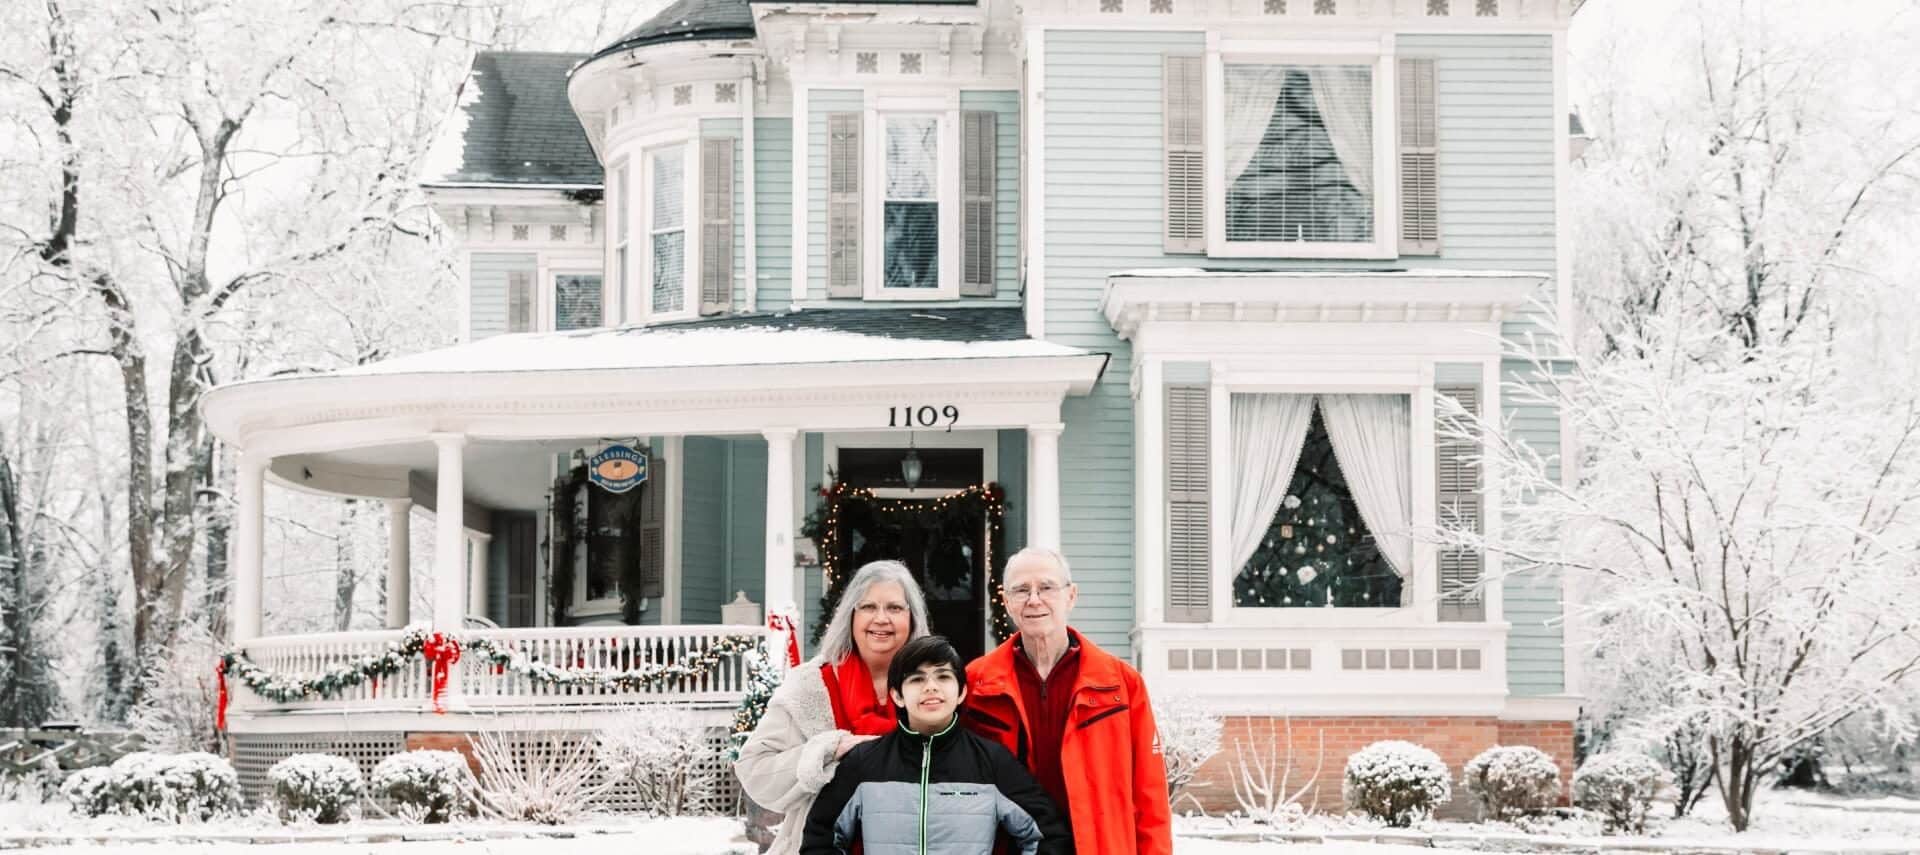 Innkeeper mom dad and son pose in front of snowy blue Victorian home with white columned porch